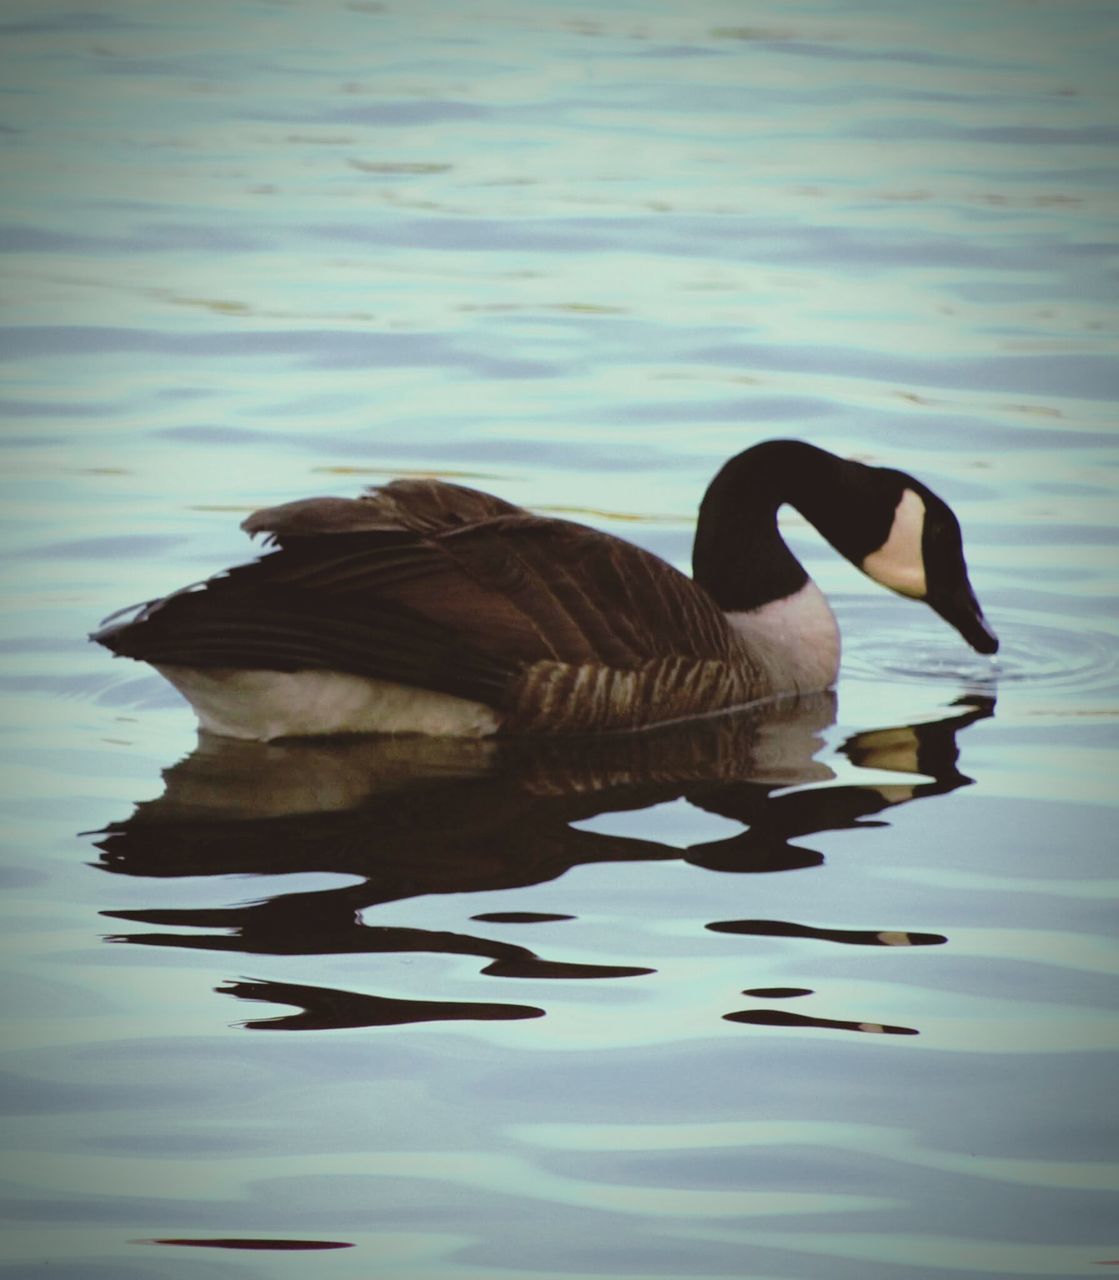 animal themes, animals in the wild, water, bird, lake, wildlife, waterfront, one animal, swimming, reflection, rippled, water bird, side view, swan, nature, outdoors, beak, duck, beauty in nature, two animals